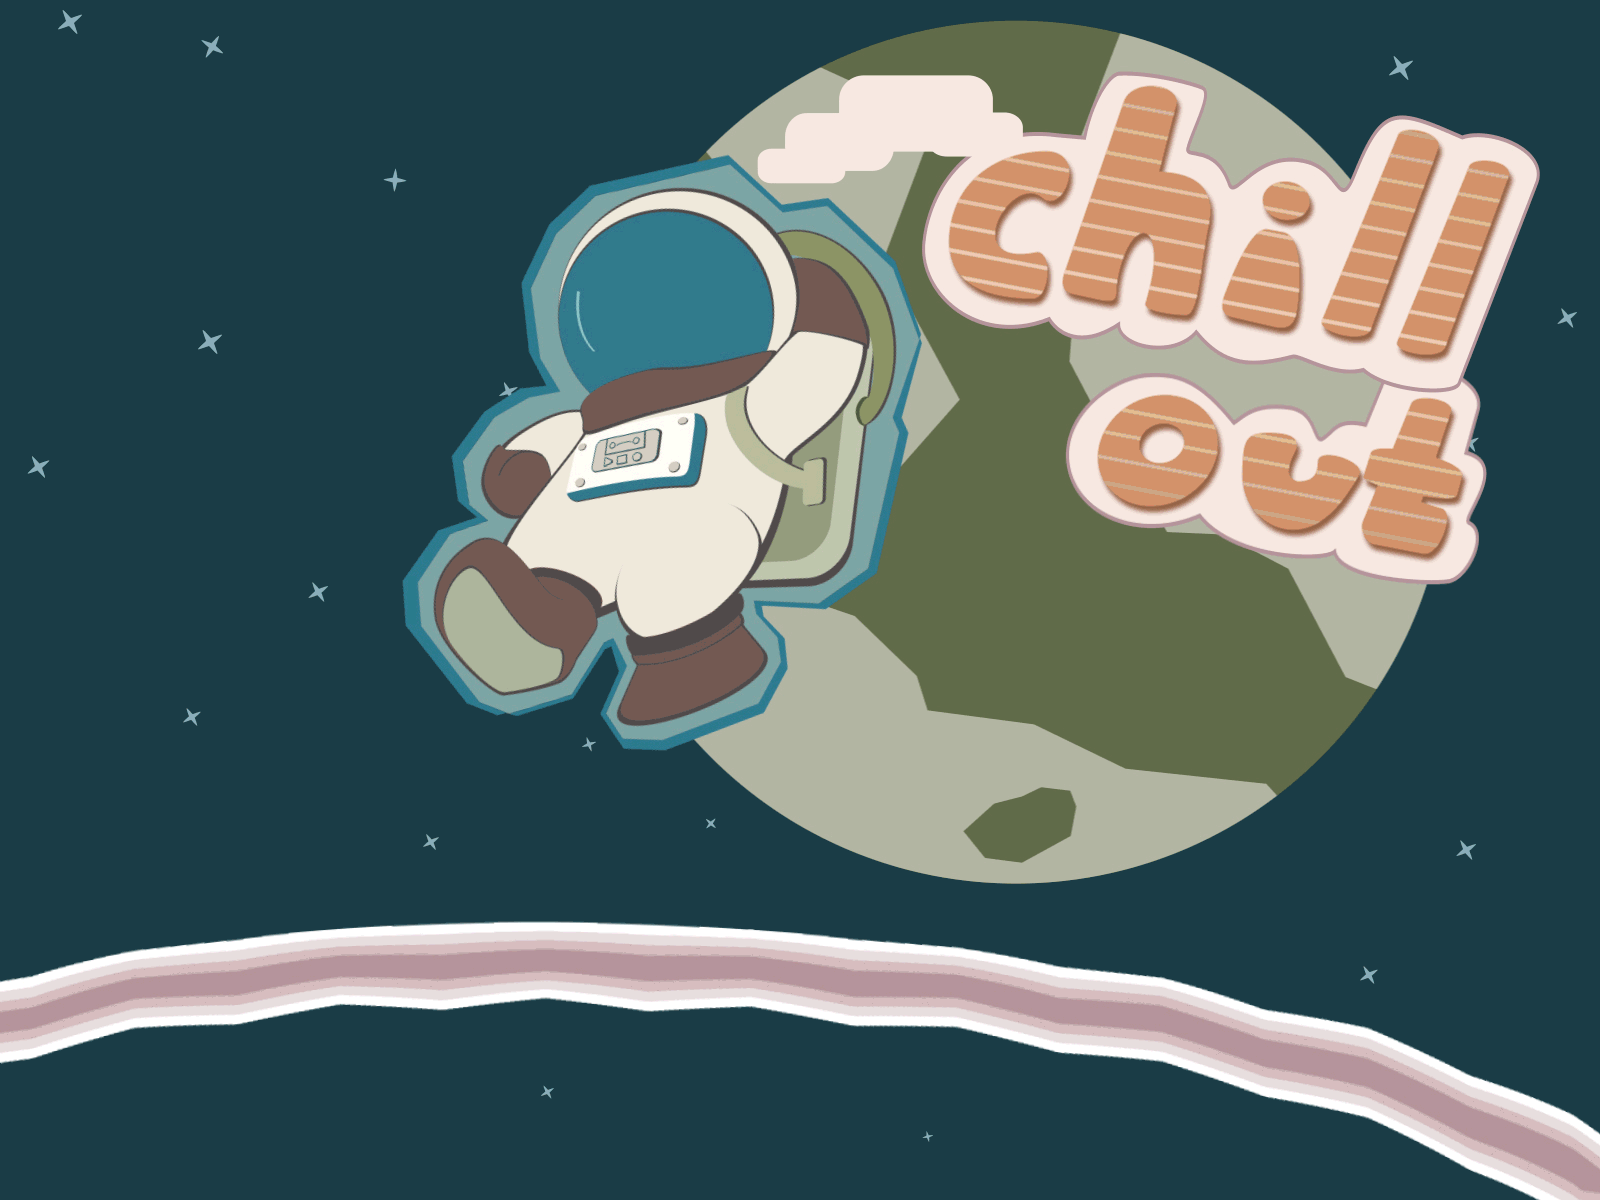 Chill on Space